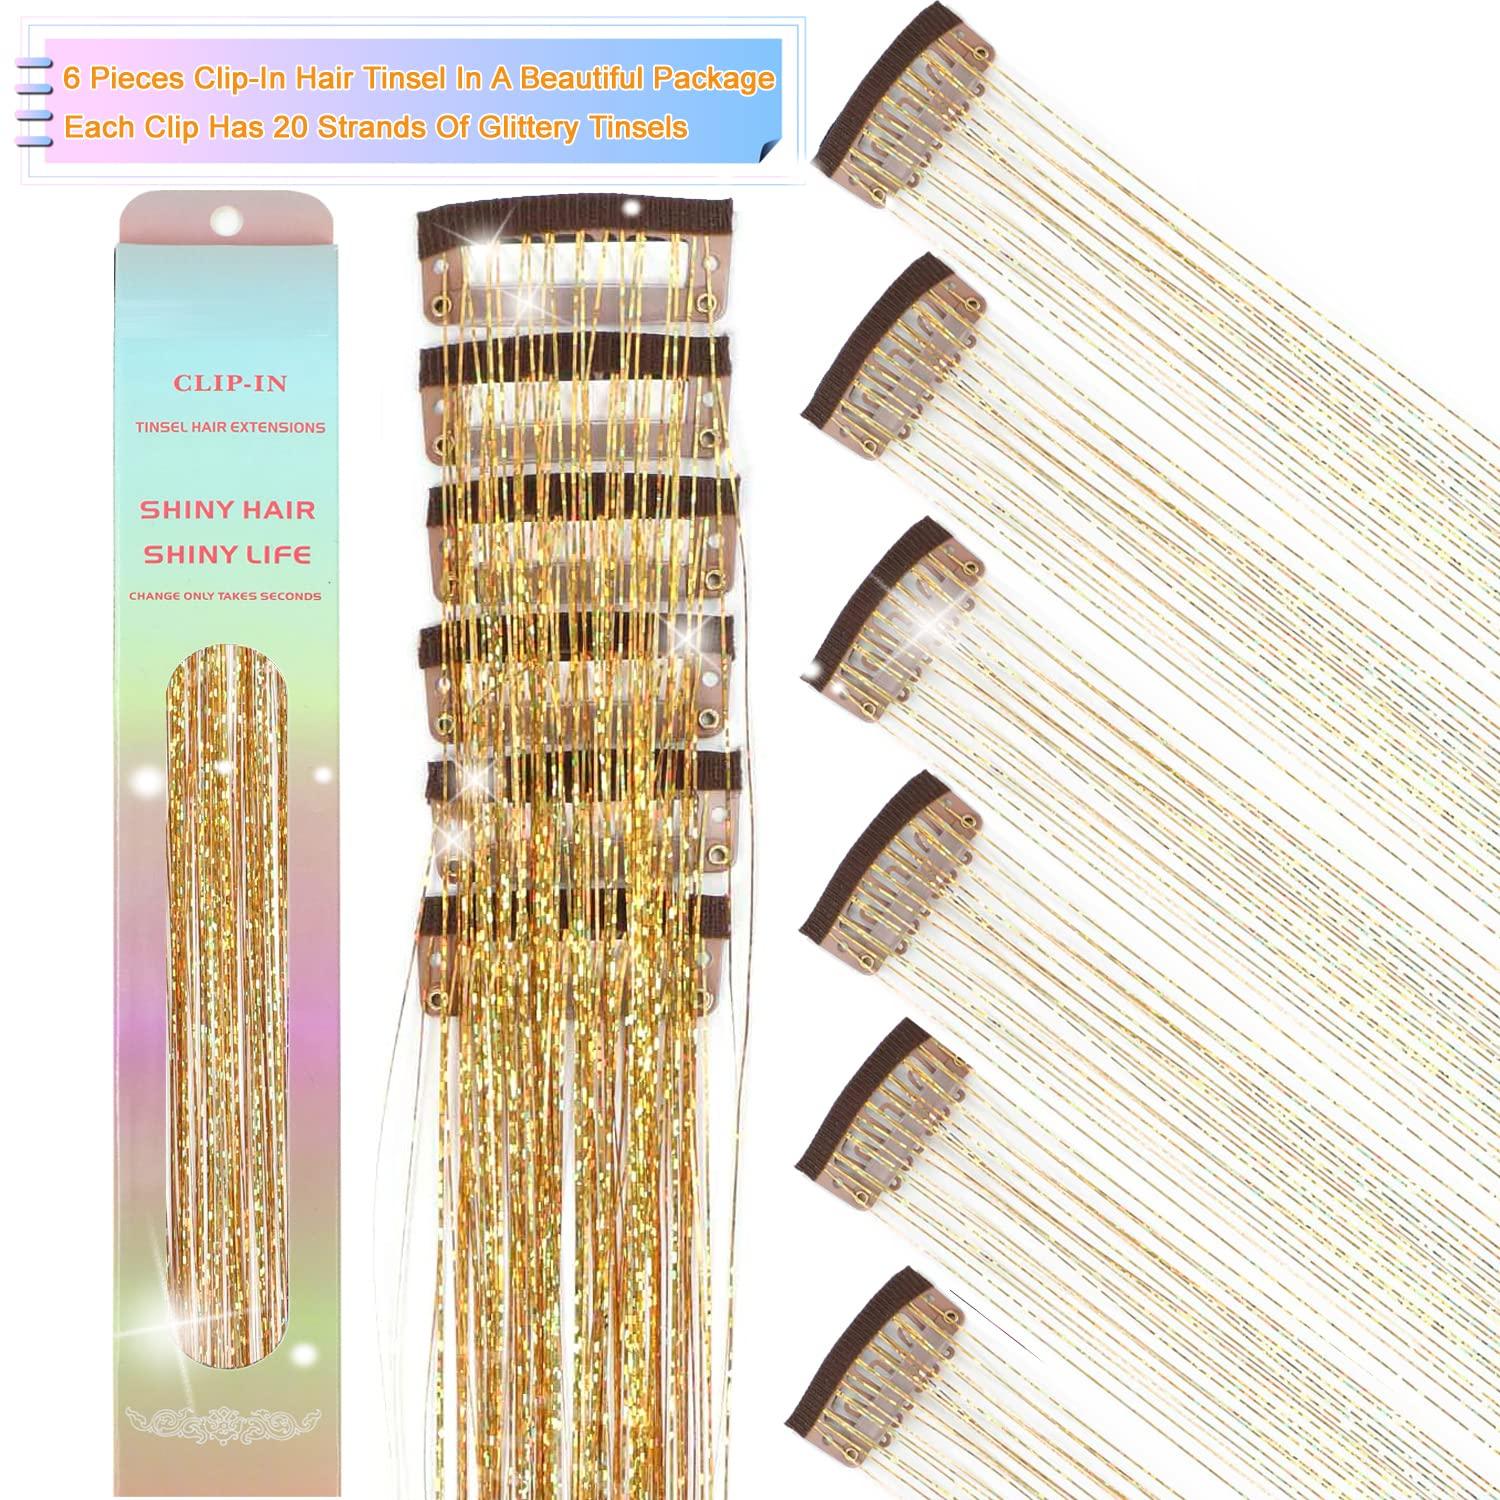  6 Pieces Clip In Hair Tinsel 23.6 Inch Fairy Hair Tinsel Kit  Clip In Tinsel Hair Extensions, Glitter Hair Tensile Clip In On Sparkling  Colorful Hair Accessories For Women Girls Kids